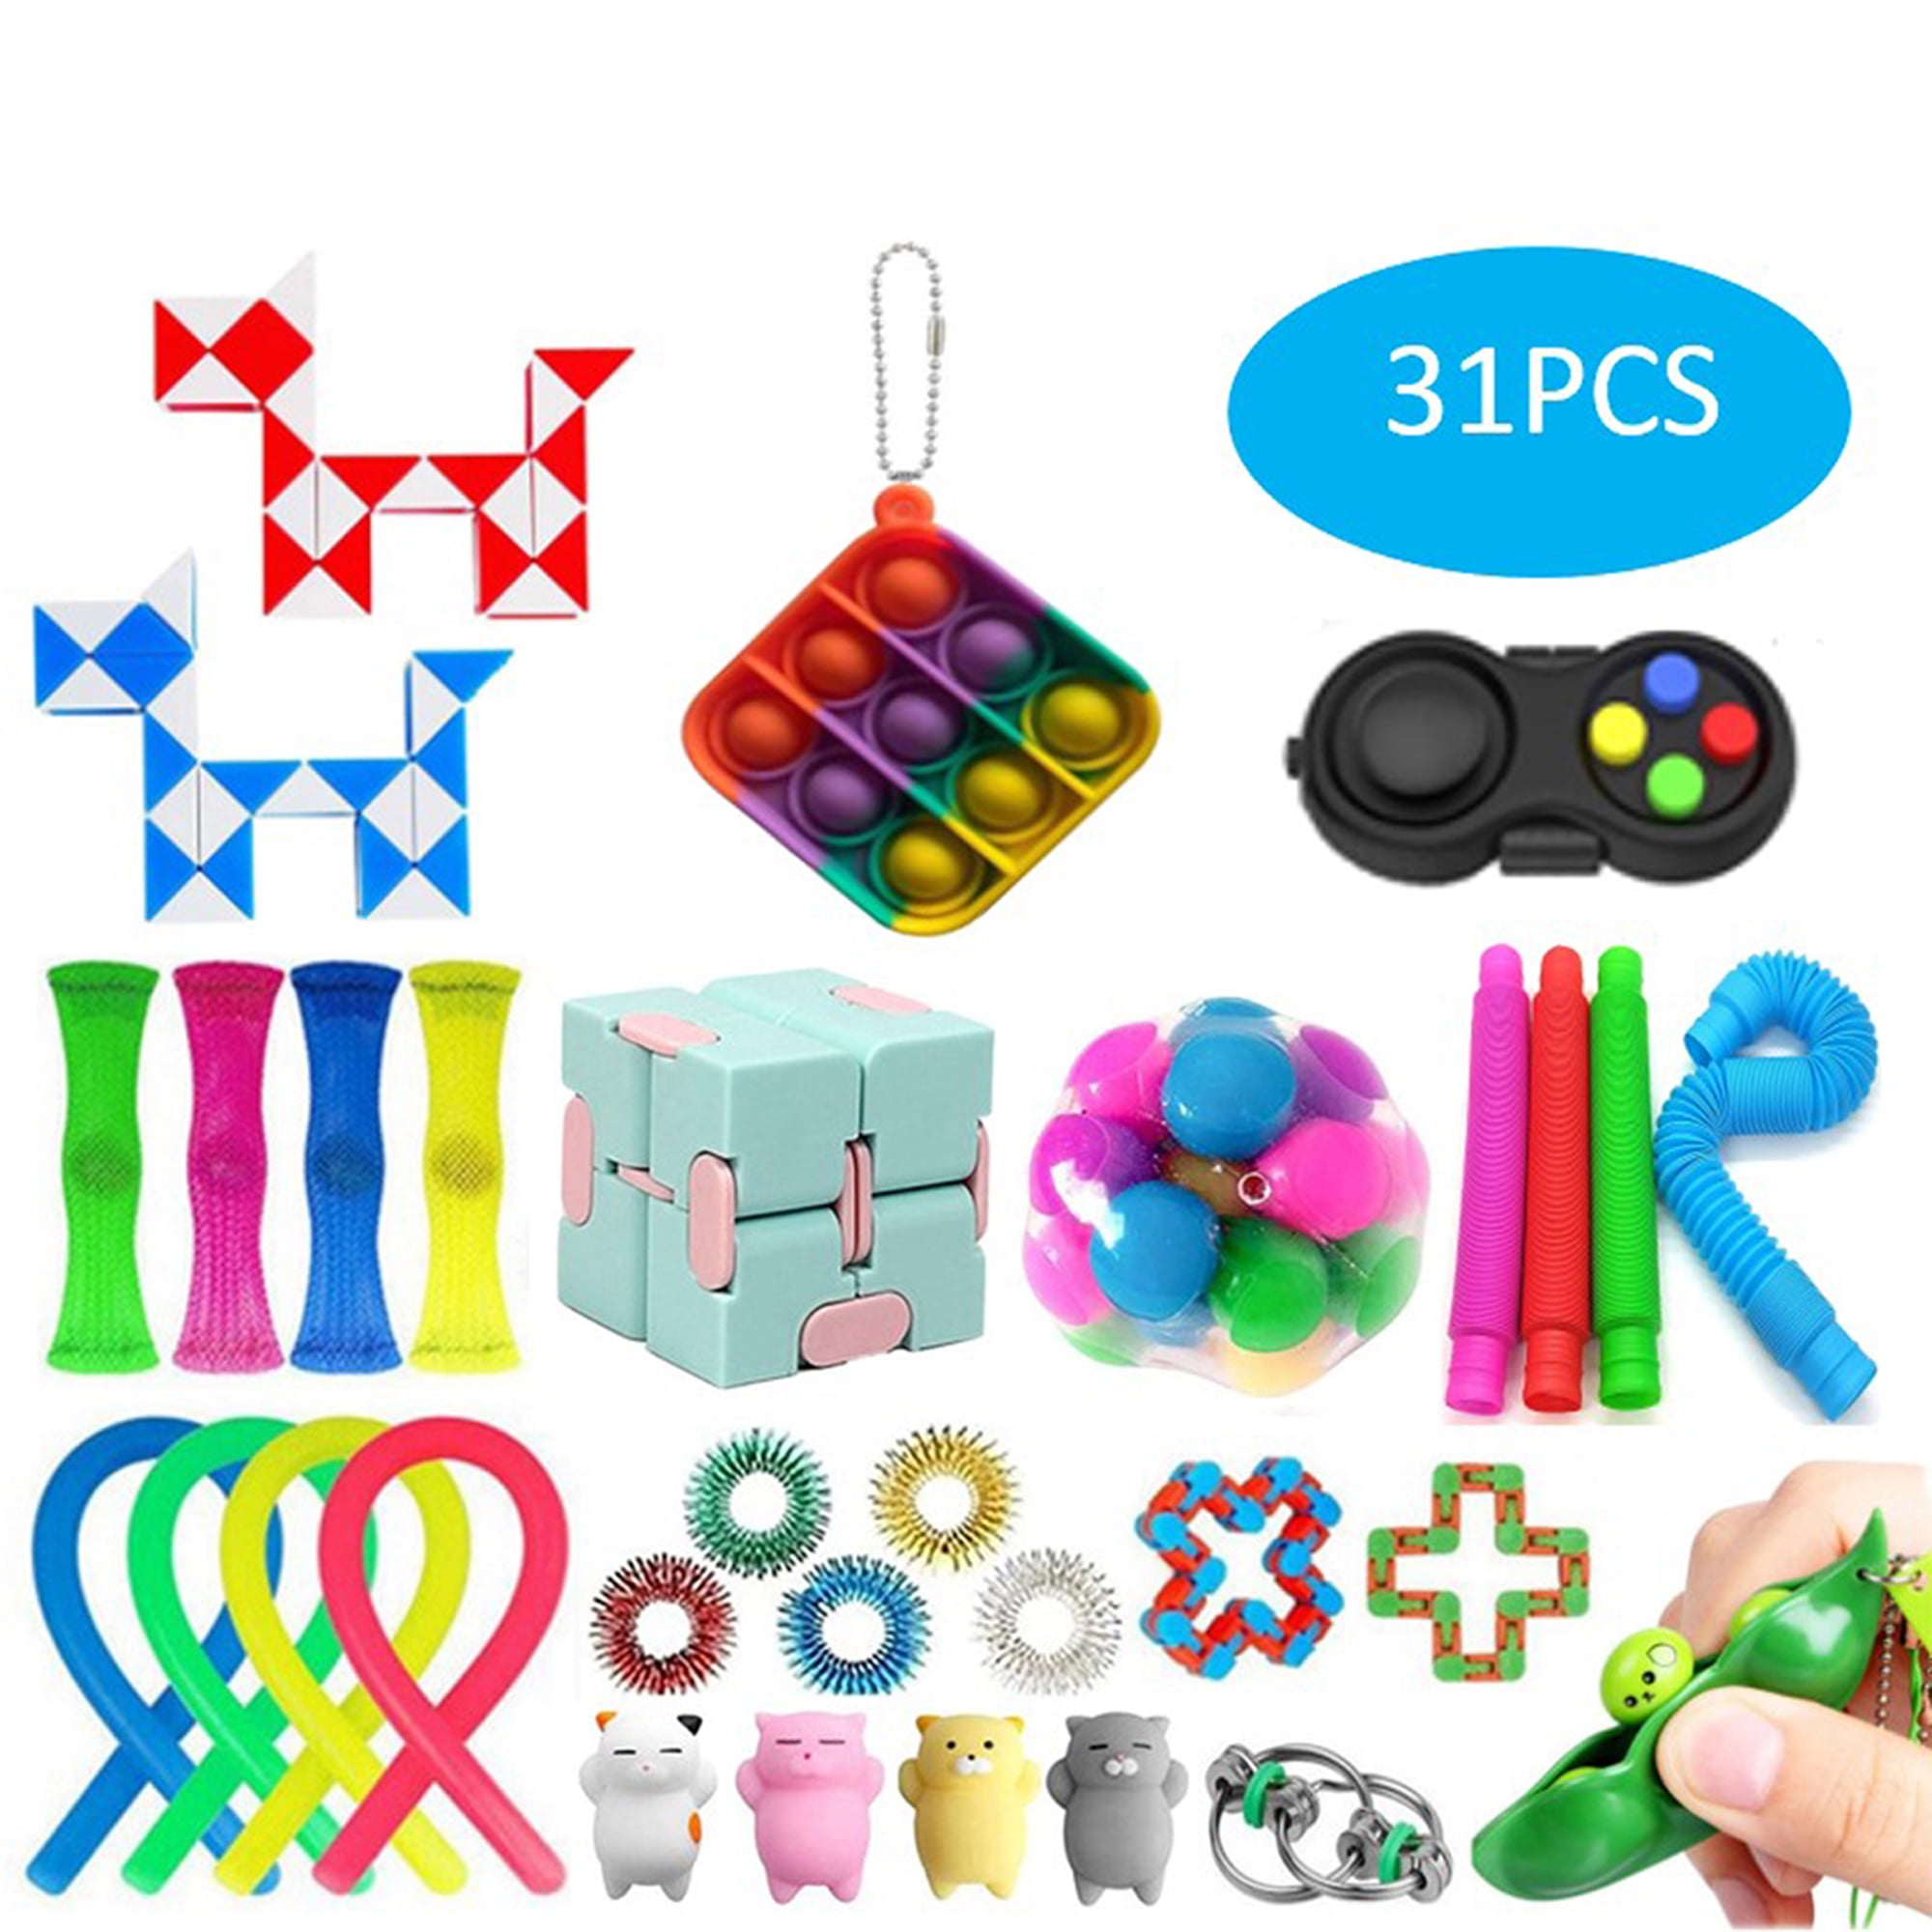 Details about   Bubble Pop Fidget Push Sensory Toy Stress Reliever For All Age Groups 